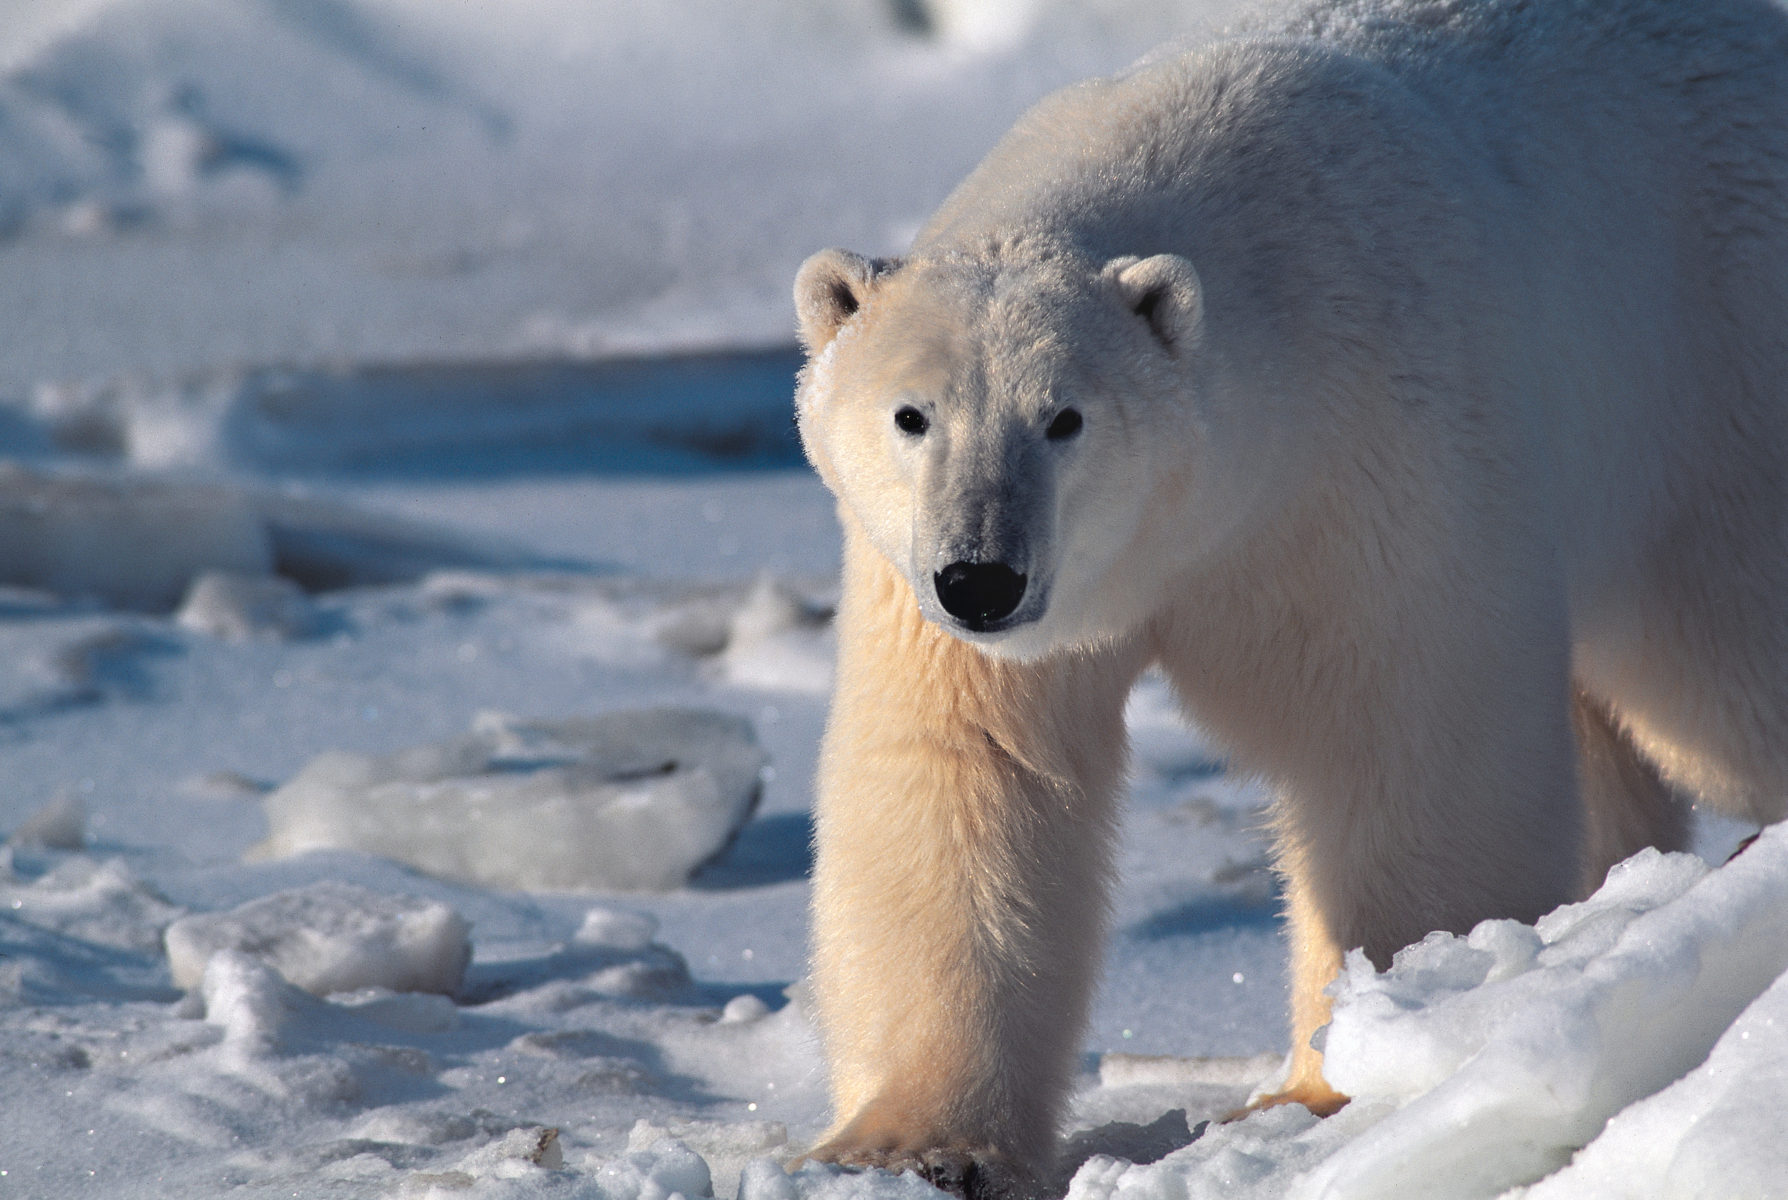 Polar bears are not a problem along the Arctic Circle Trail